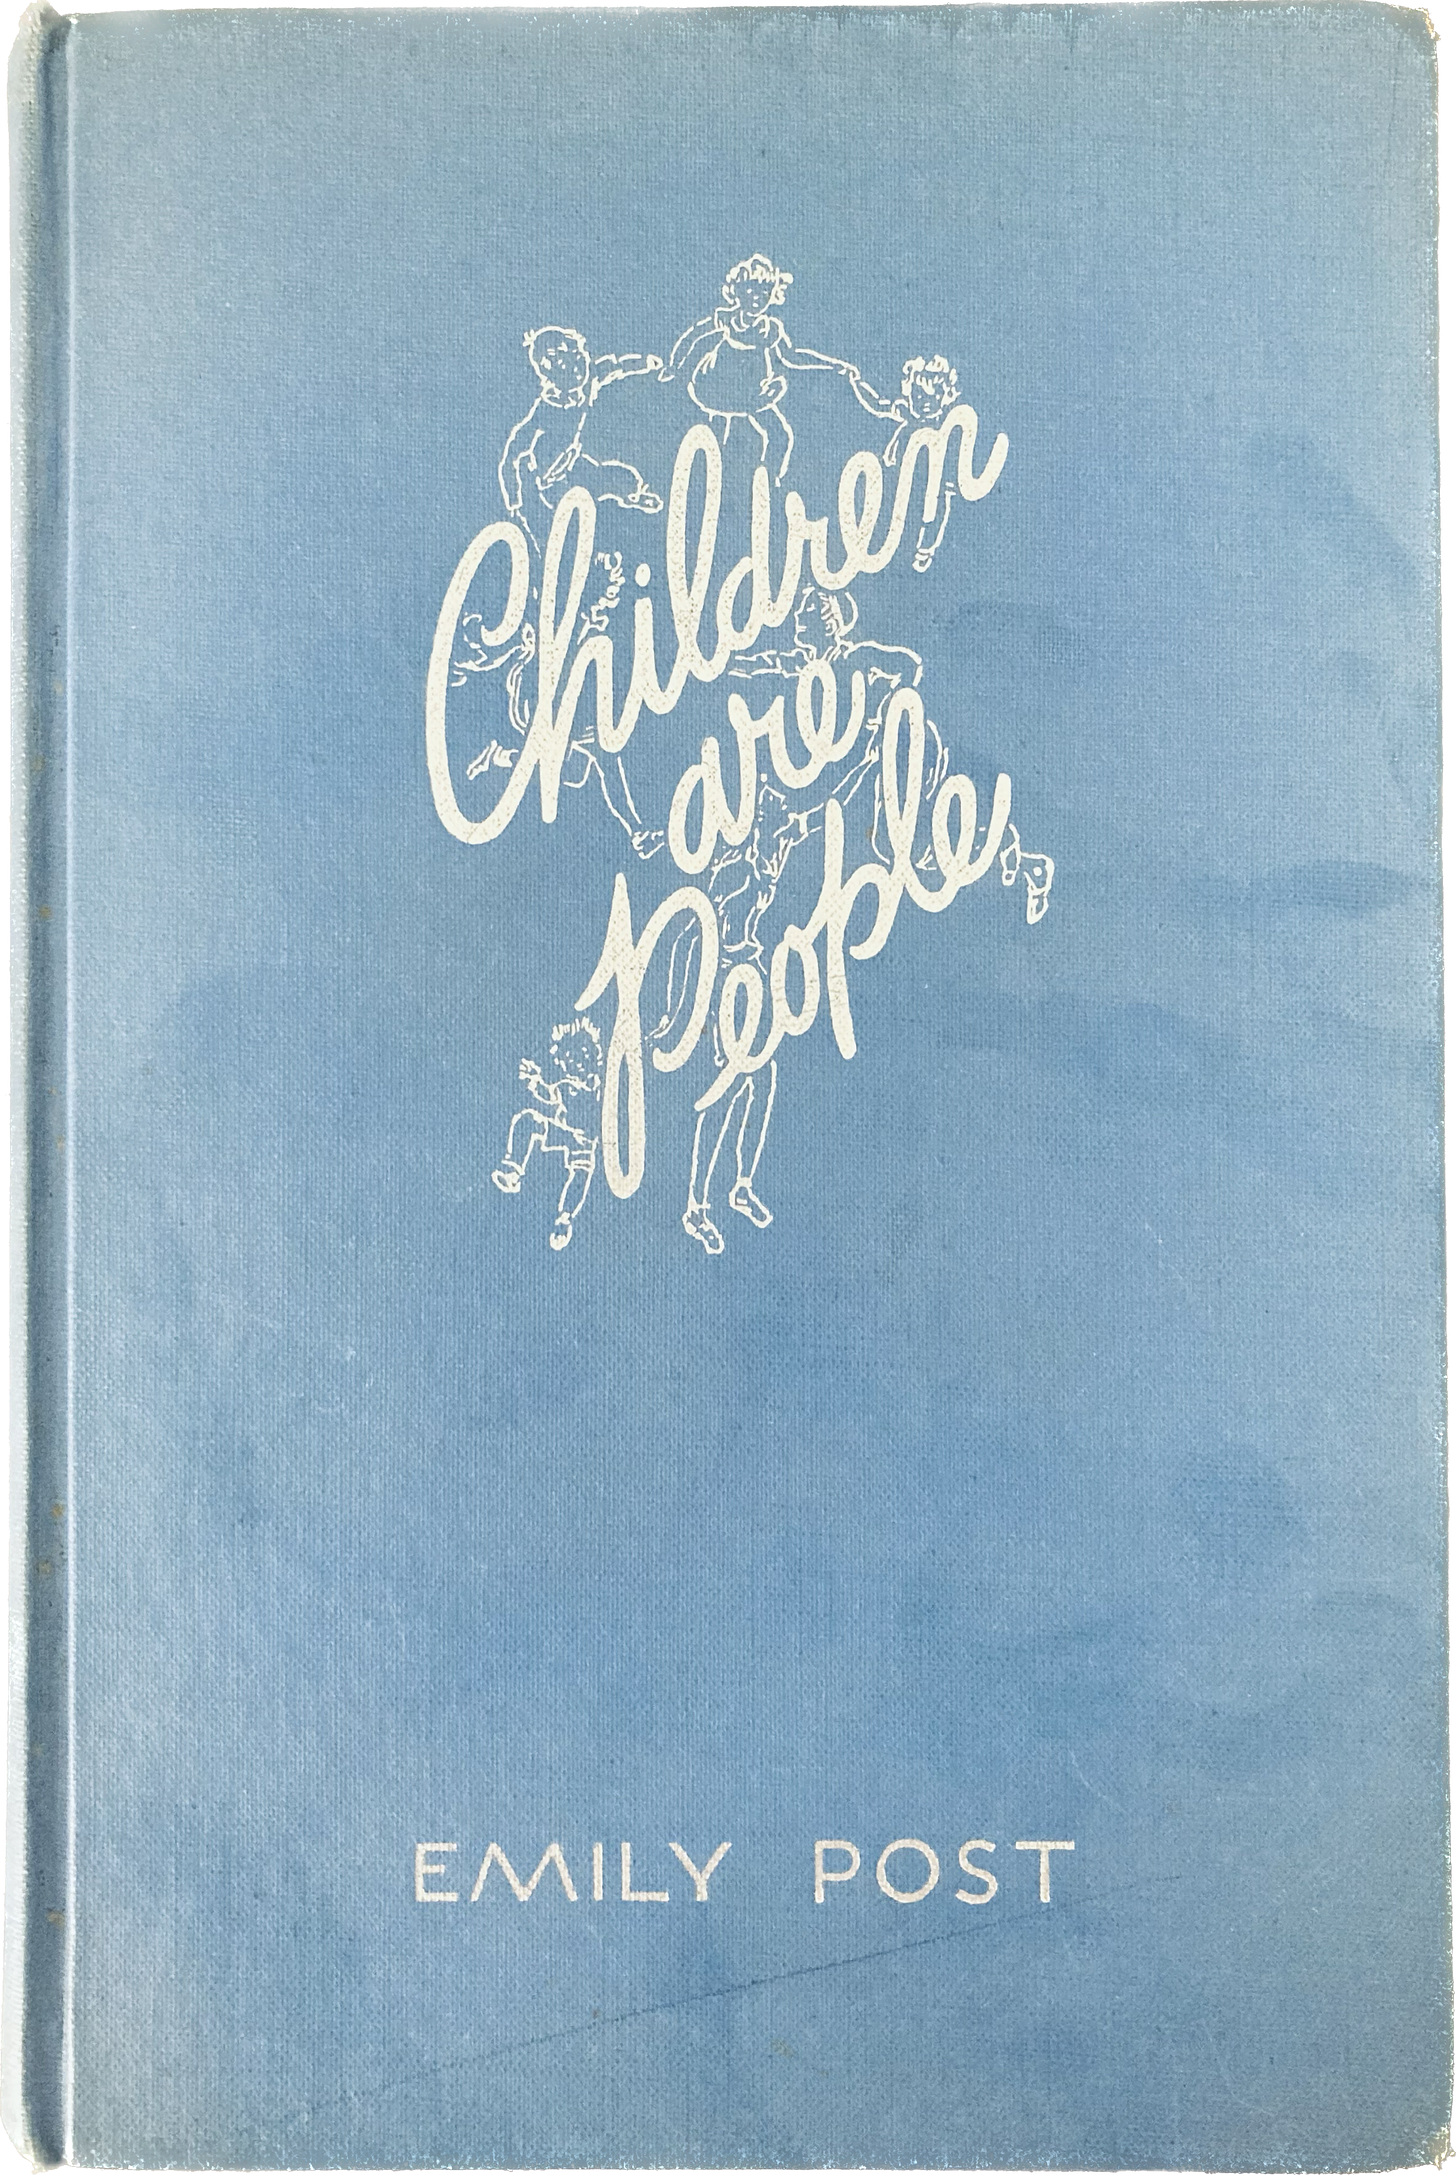 Medium almost dusty blue cloth book cover with silver debossed writing in cursive that reads Children Are People with small illustrations of kids playing around the words, Emily Post is written at hte bottom in sans-serif type